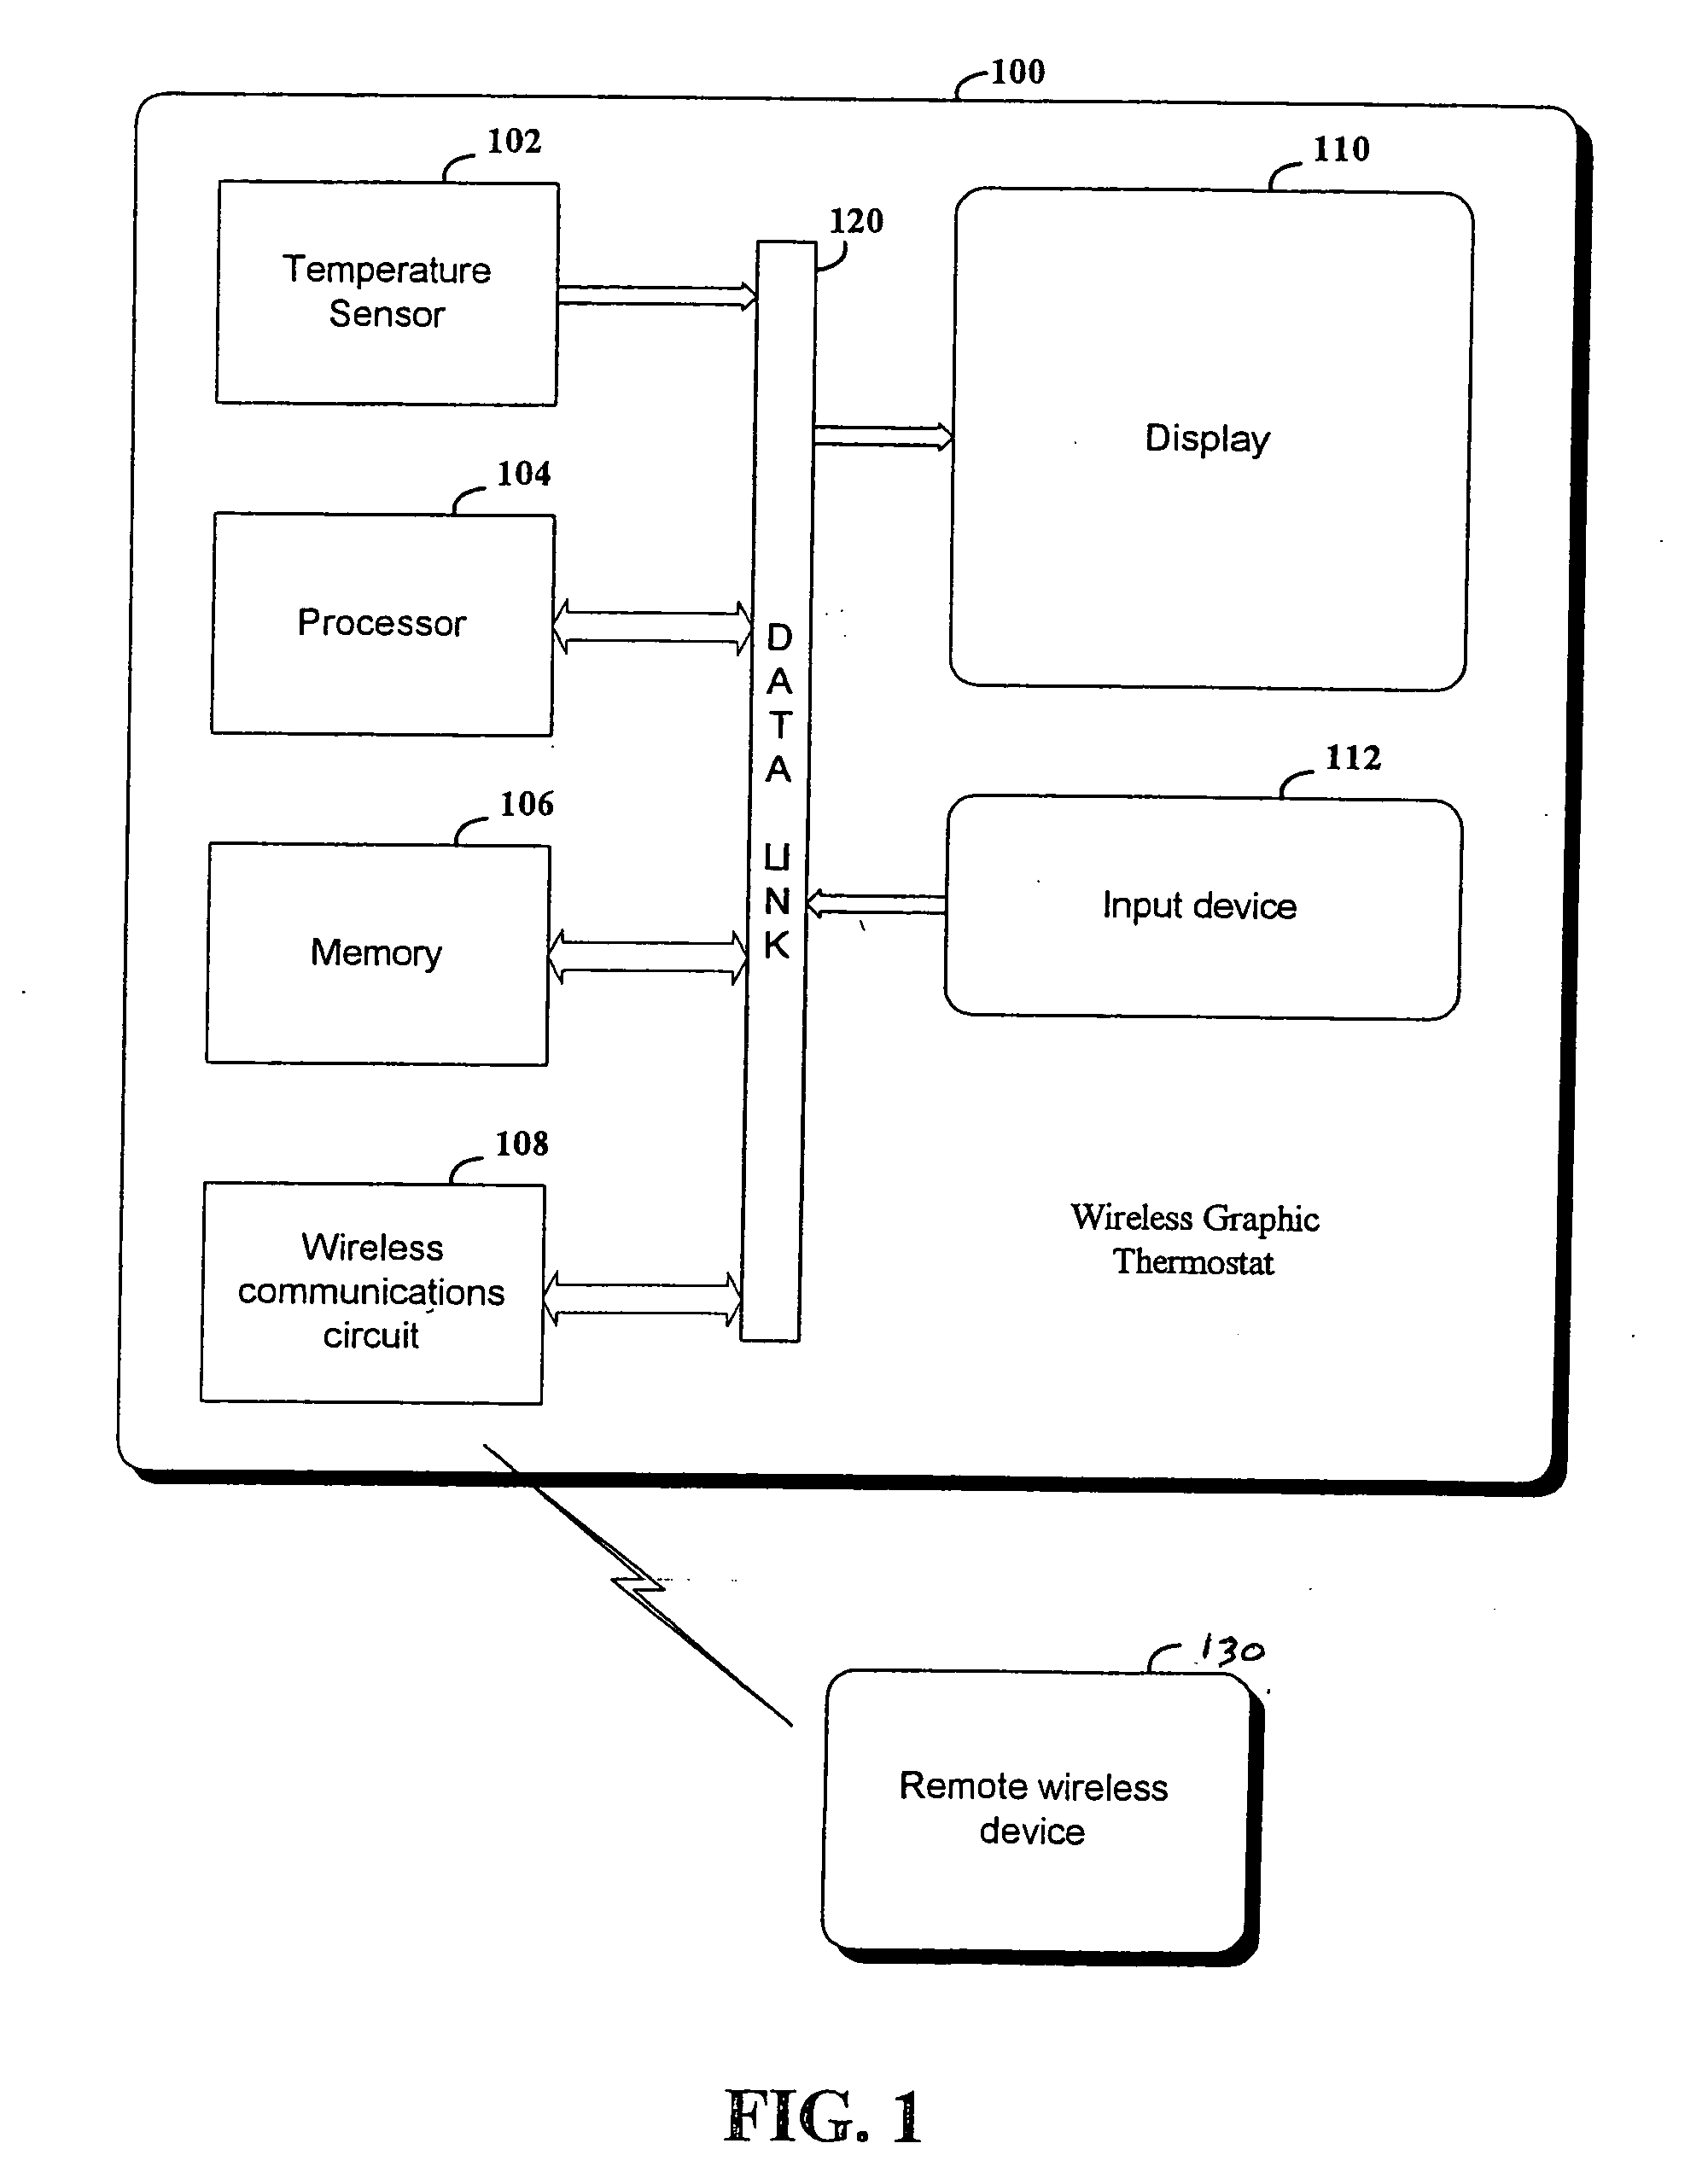 RF interconnected HVAC system and security system